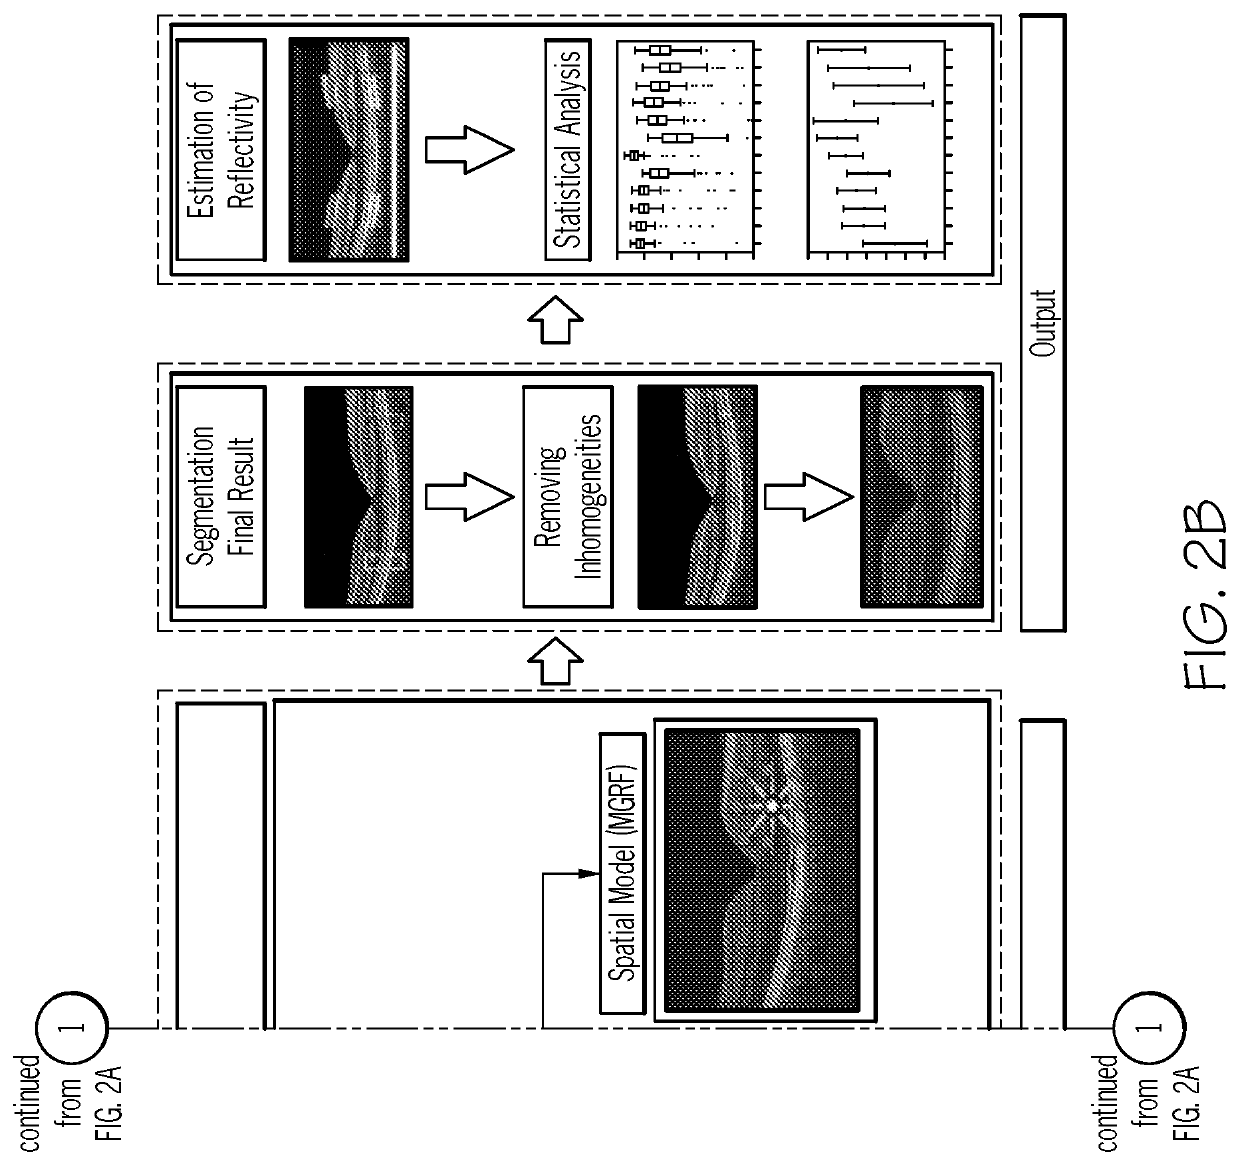 Automated methods for the objective quantification of retinal characteristics by retinal region and diagnosis of retinal pathology